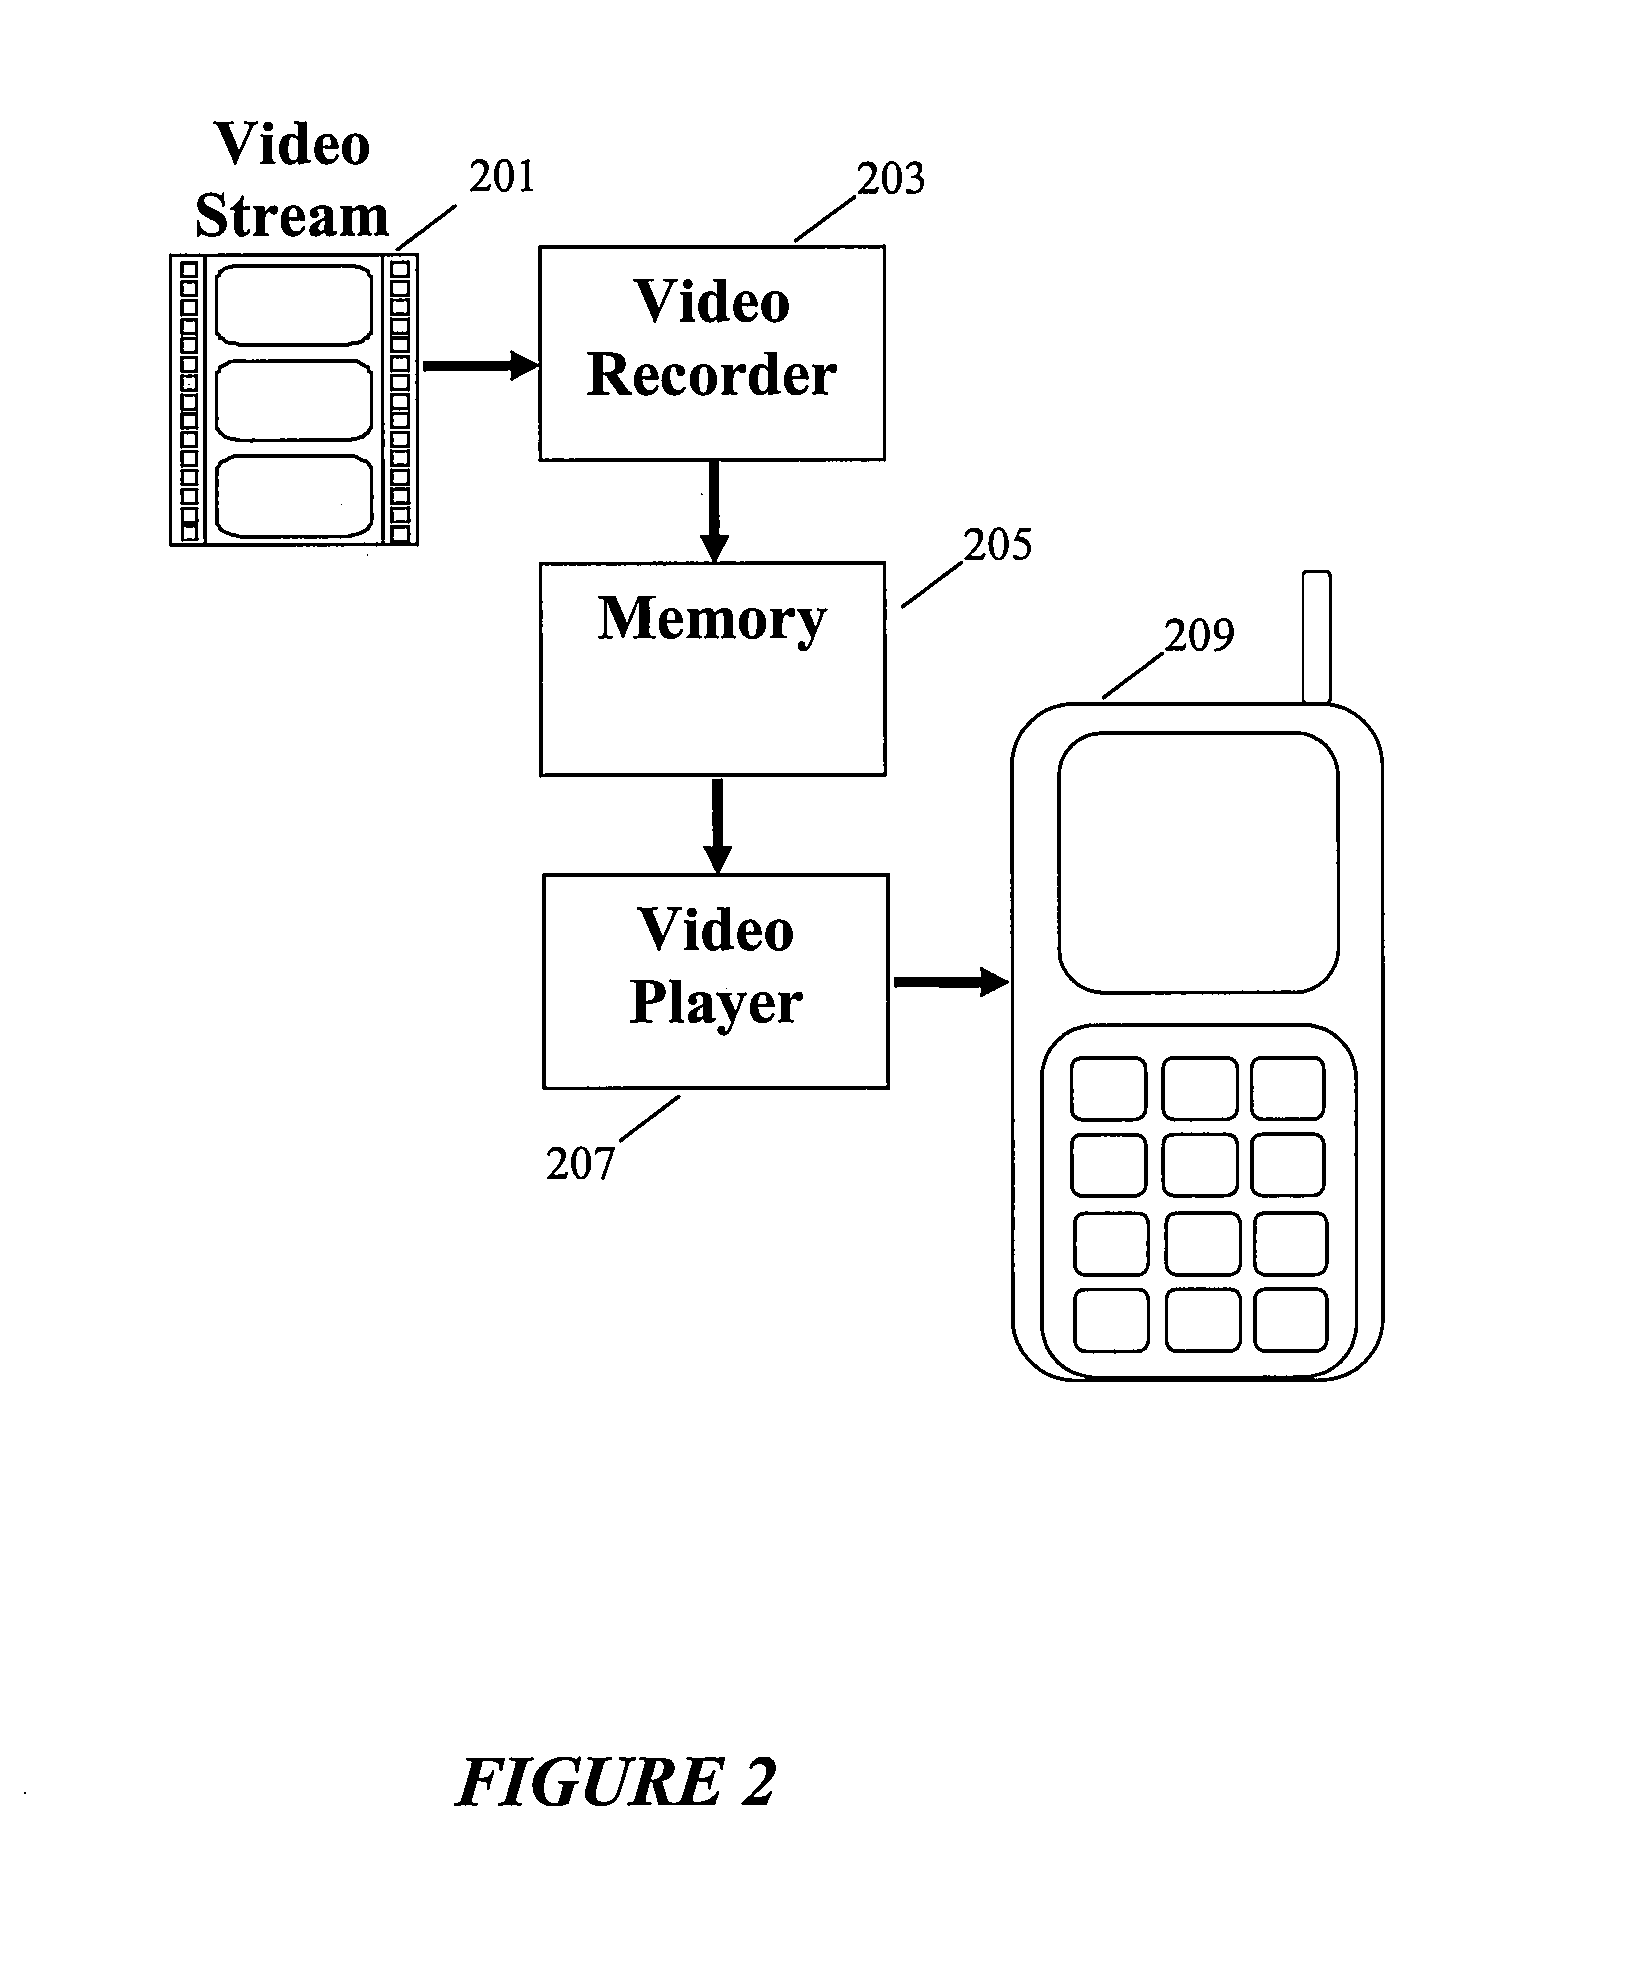 Method and system for generating compressed video to improve reverse playback